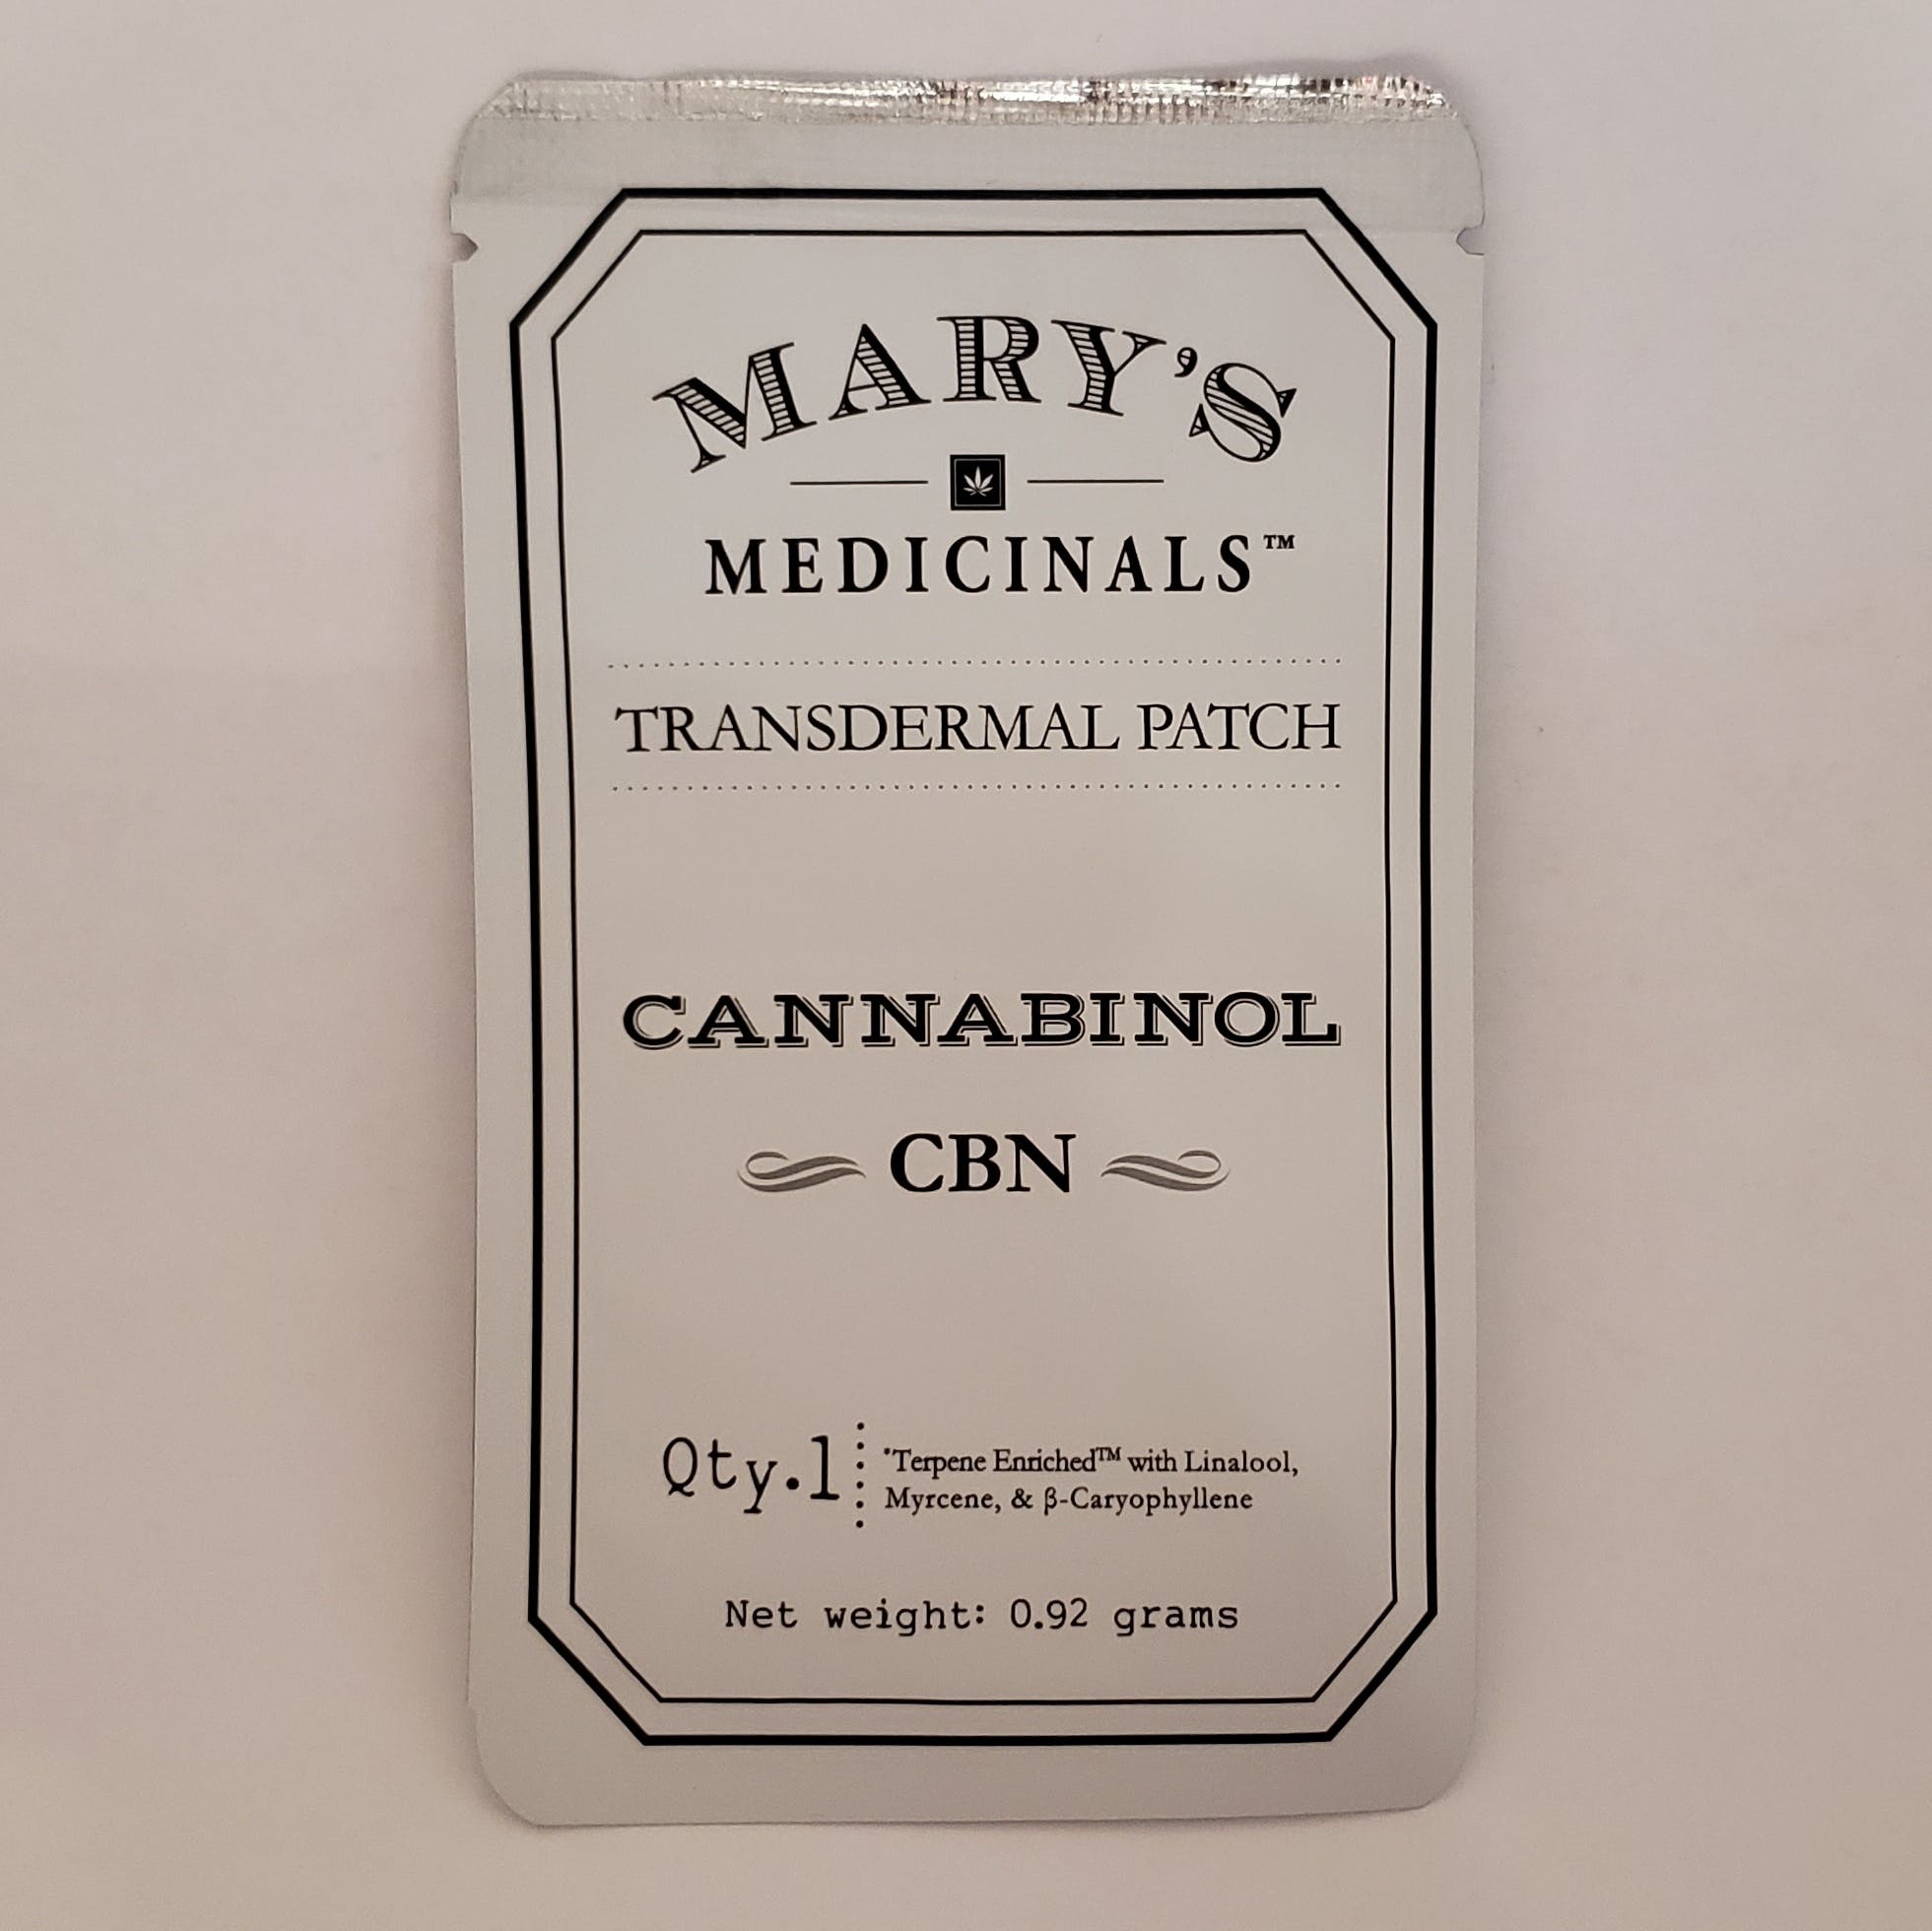 marijuana-dispensaries-mission-wheaton-newly-opened-in-silver-spring-marys-medicinals-cbn-10mg-patch